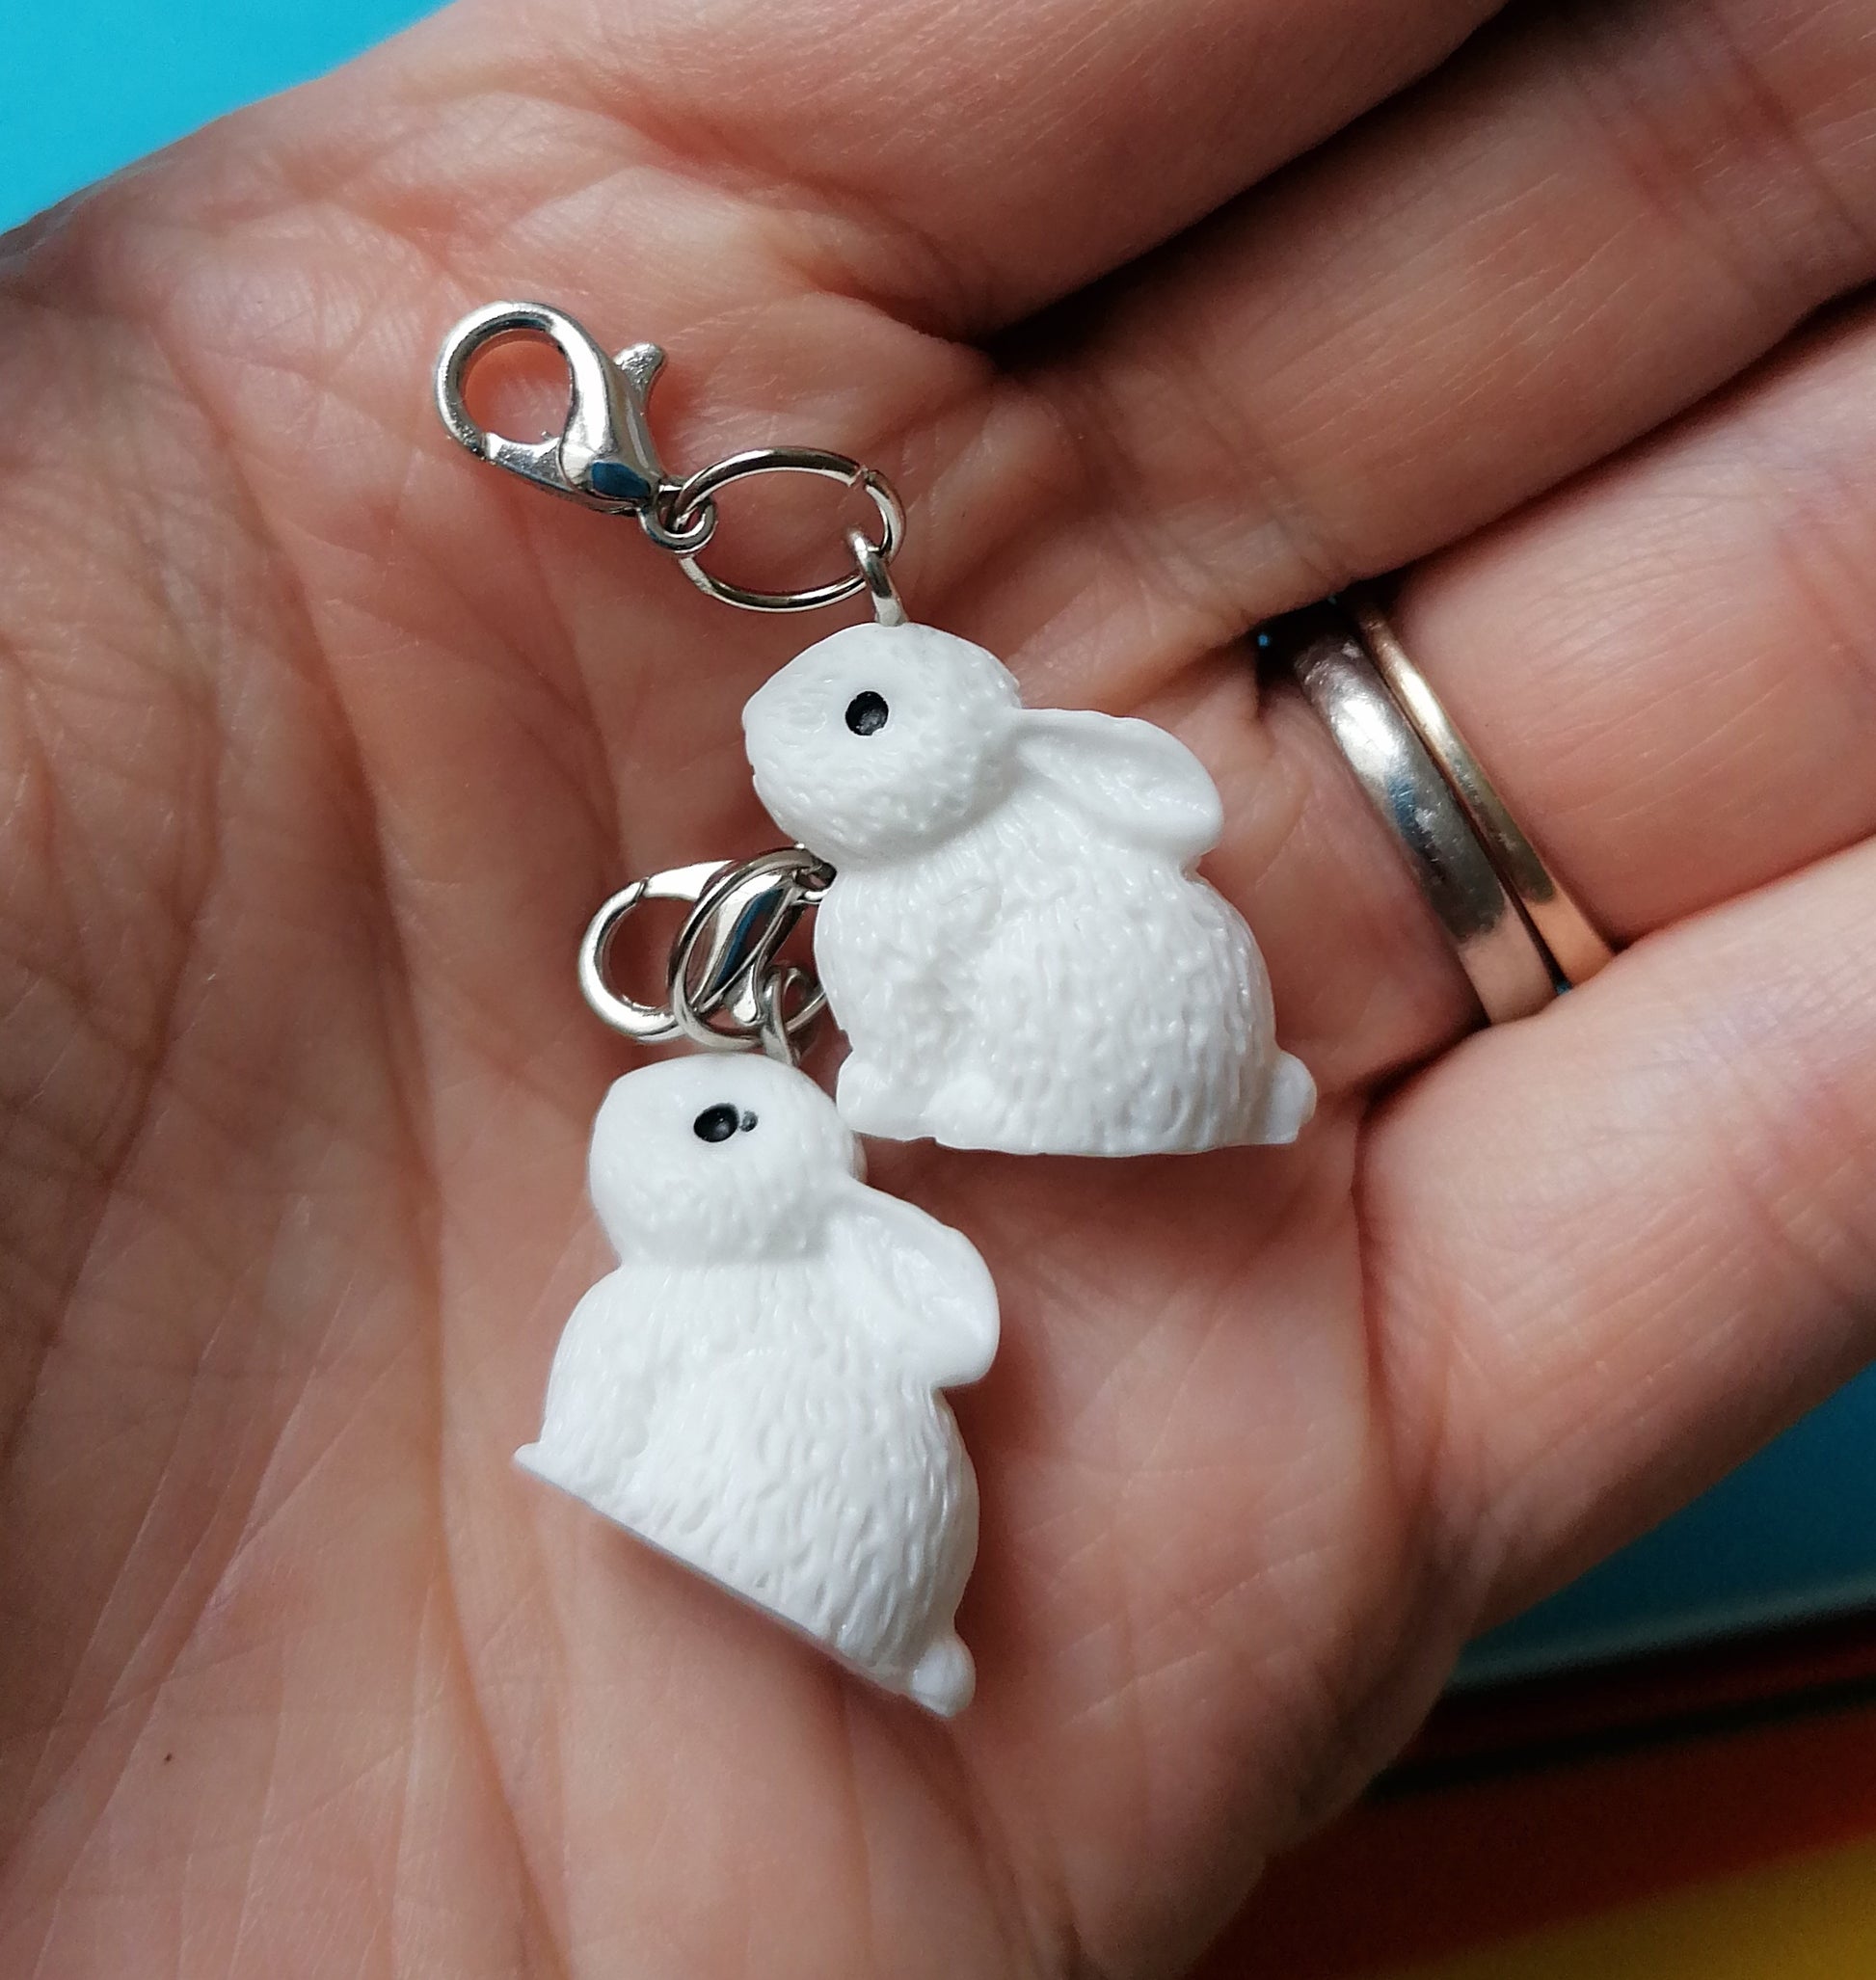 Bunny rabbit knit markers for knitting and crochet. Rabbit progress keepers. Ideal gift for knitters. 